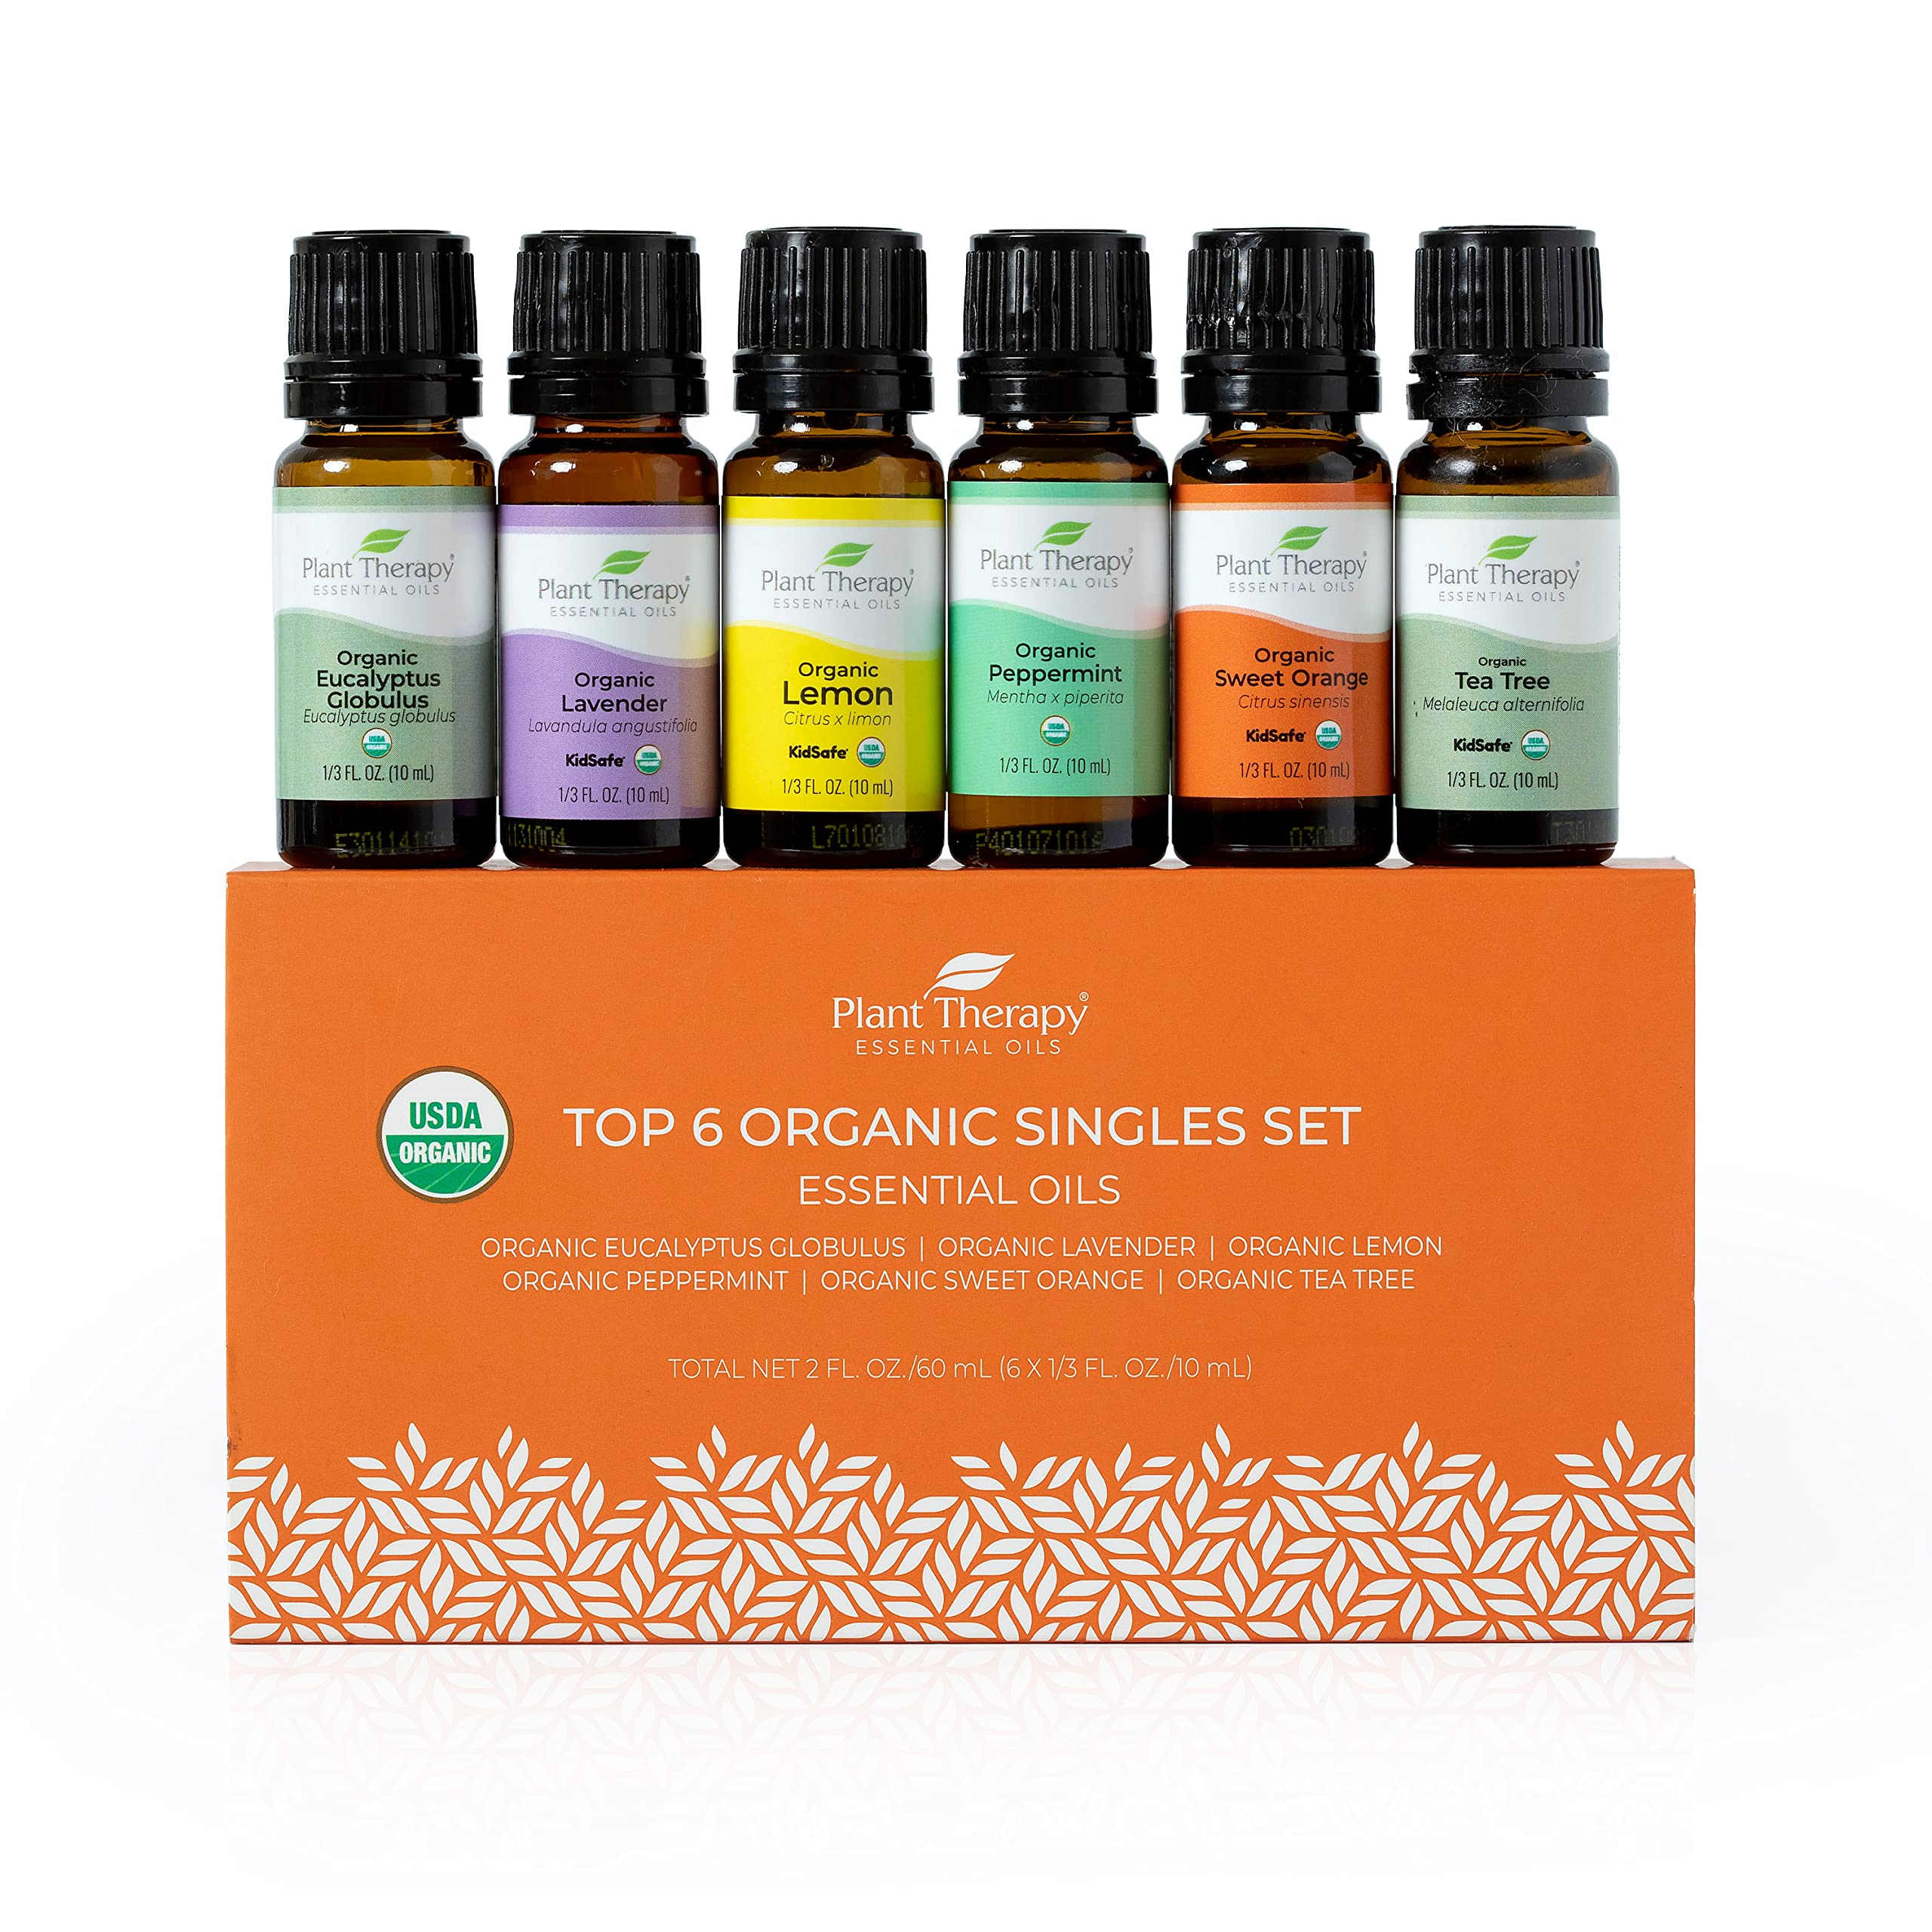 Plant Therapy Top 6 USDA Organic Essential Oil Set